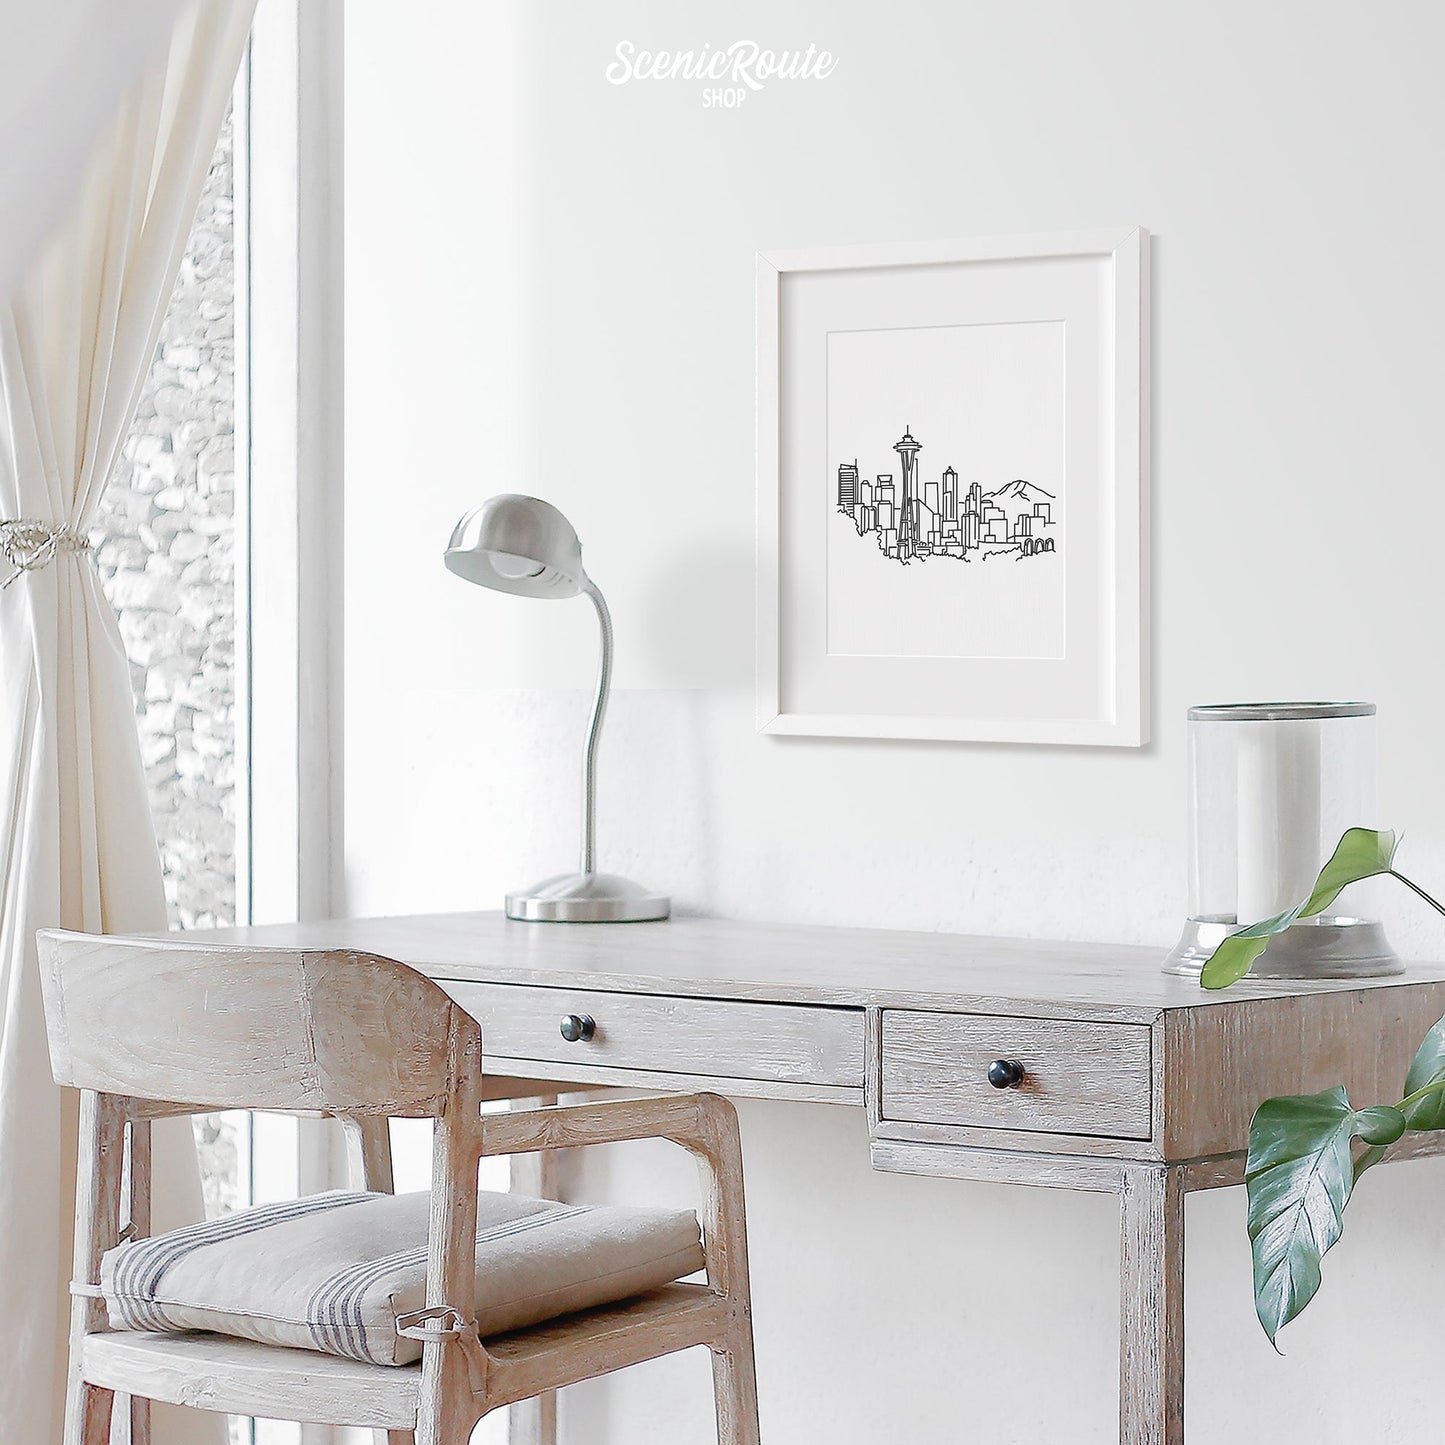 A framed line art drawing of the Seattle Skyline hanging above a desk with a lamp